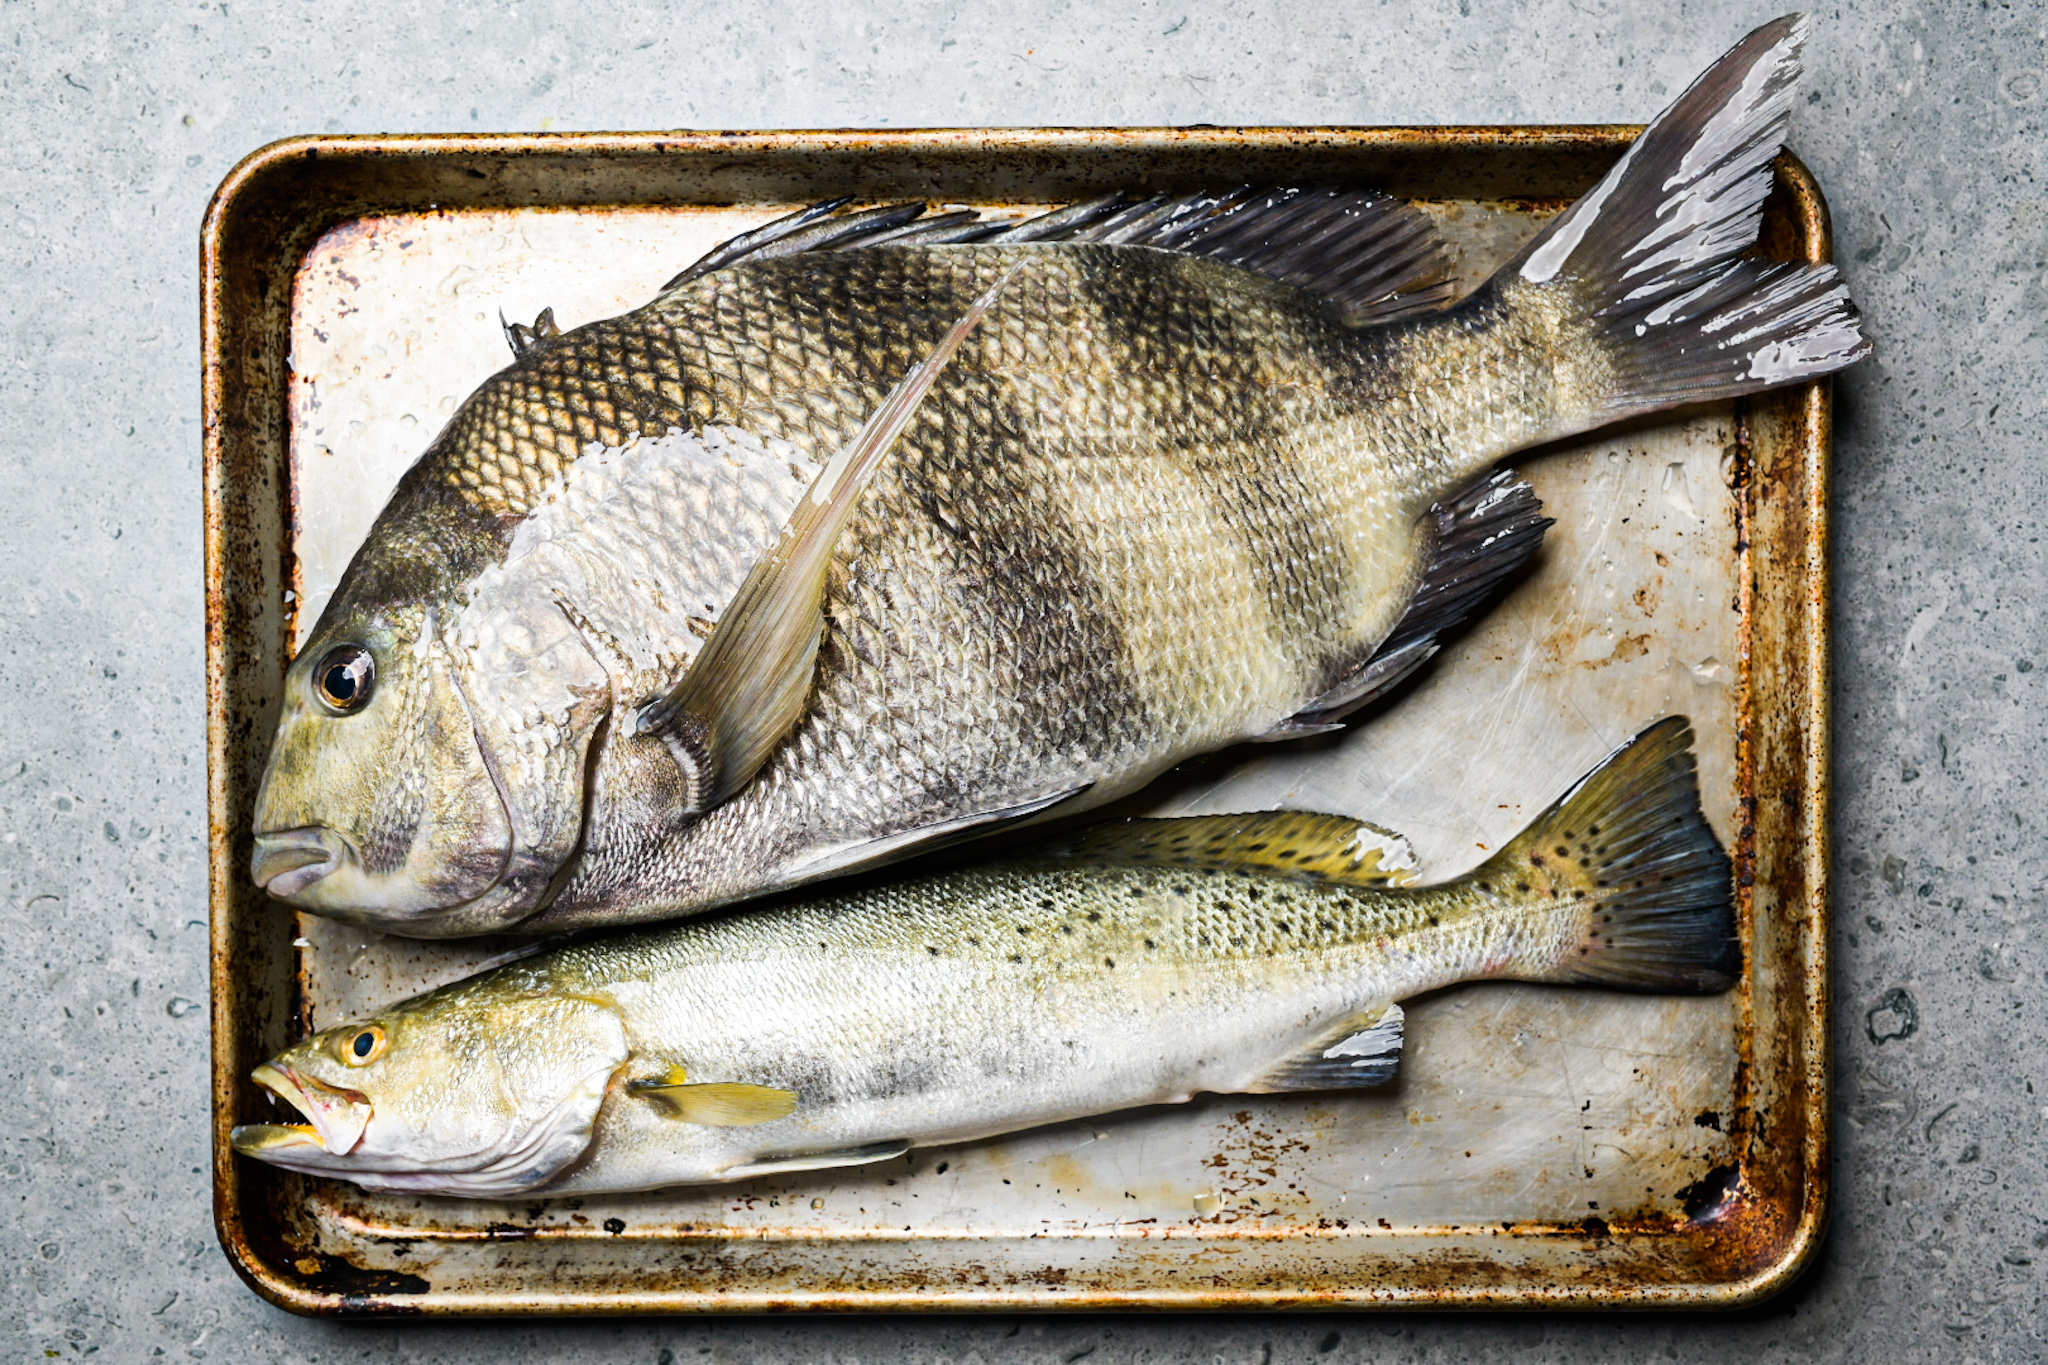 Fresh sheepshead and speckled trout from the marsh